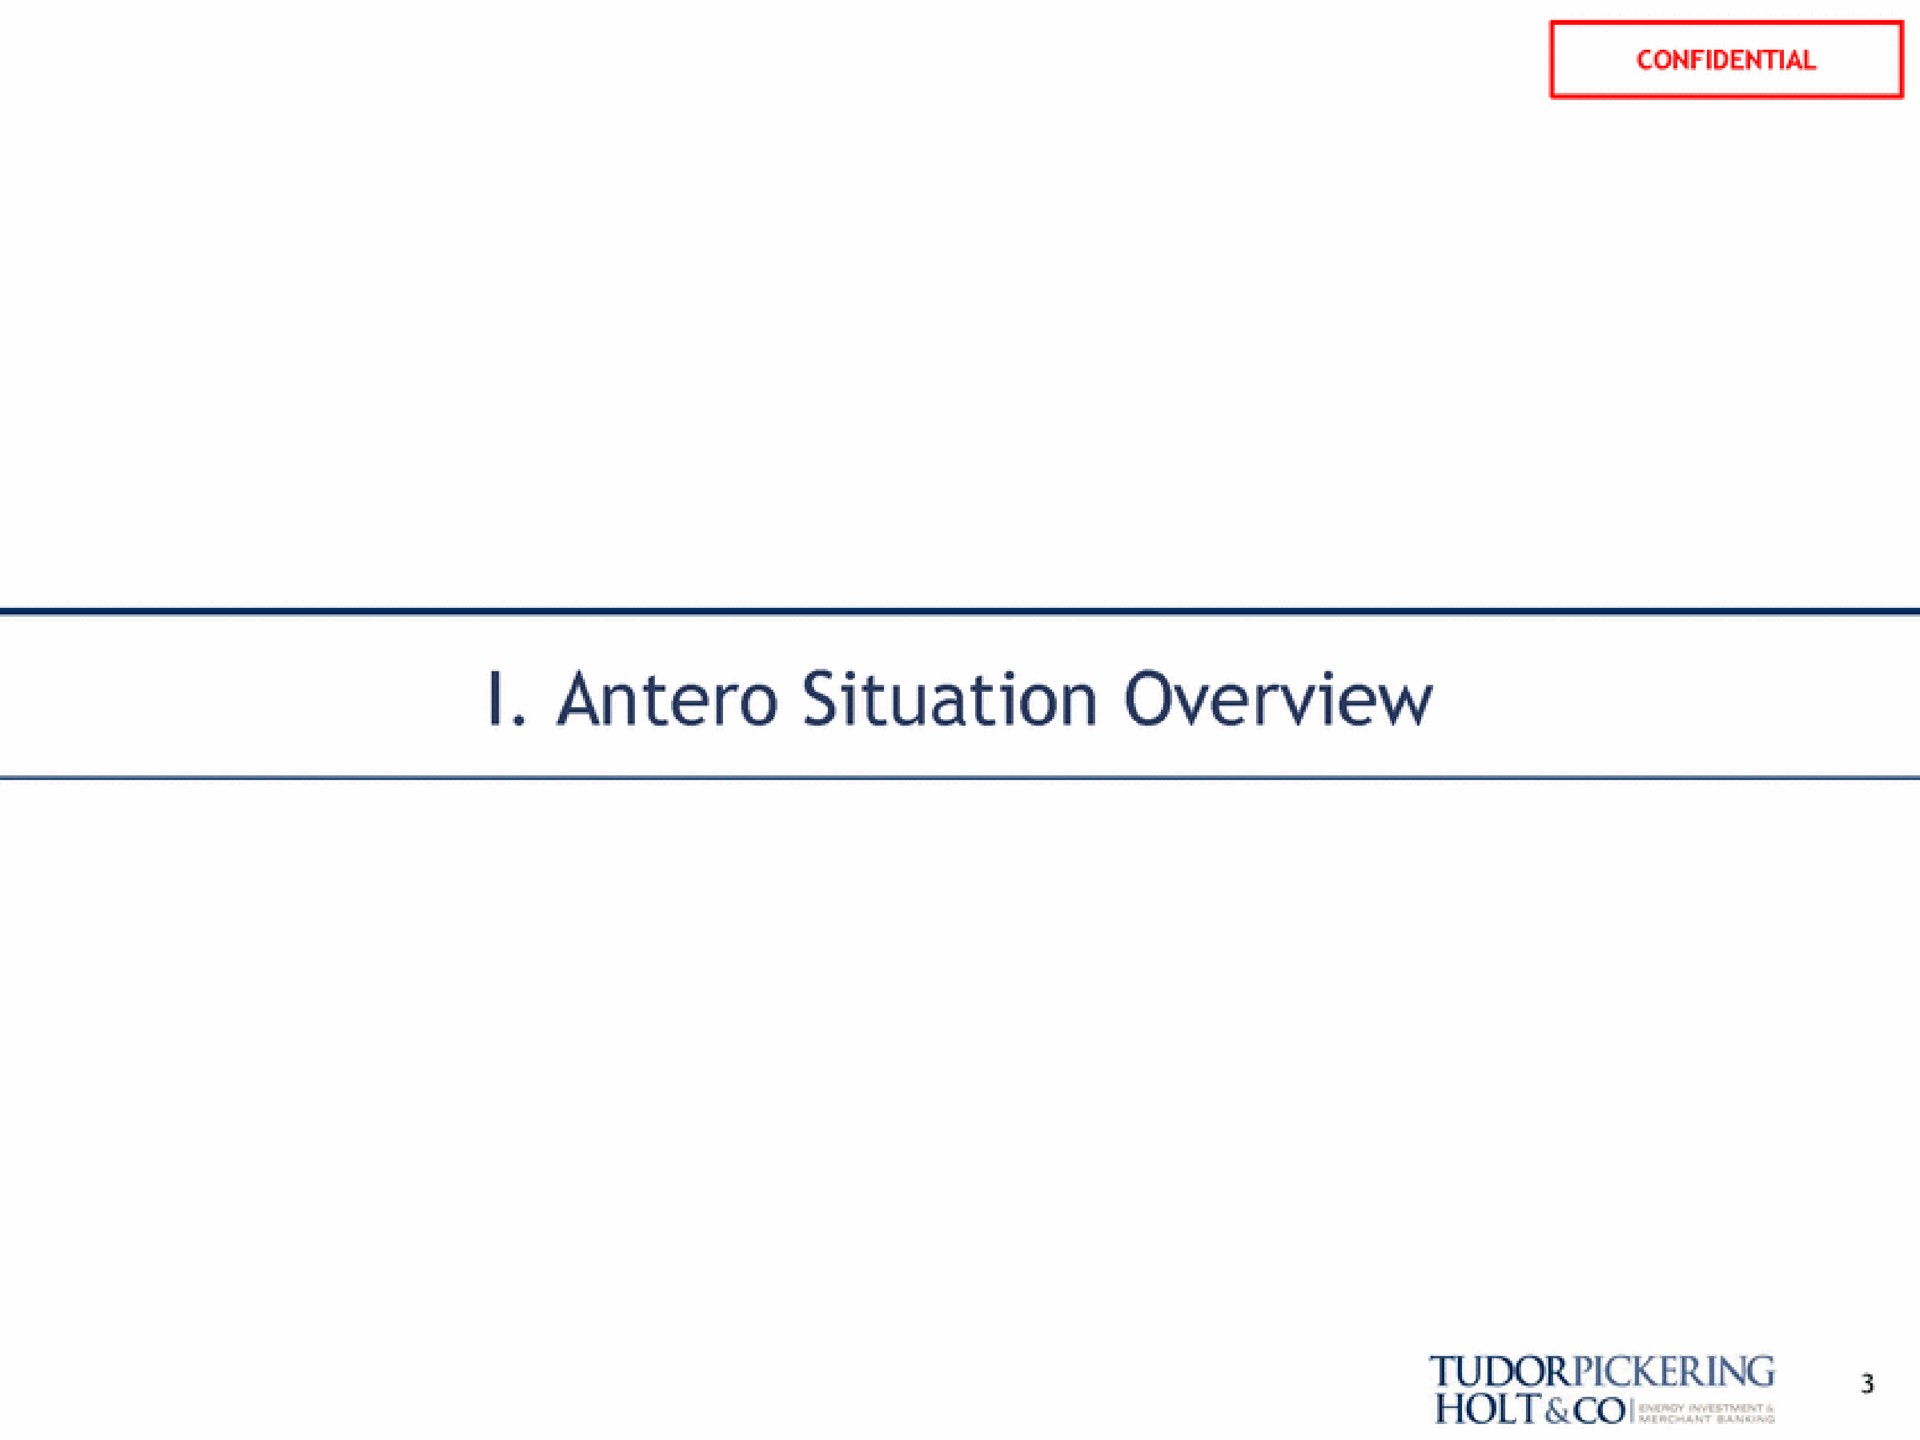 situation overview | Tudor, Pickering, Holt & Co